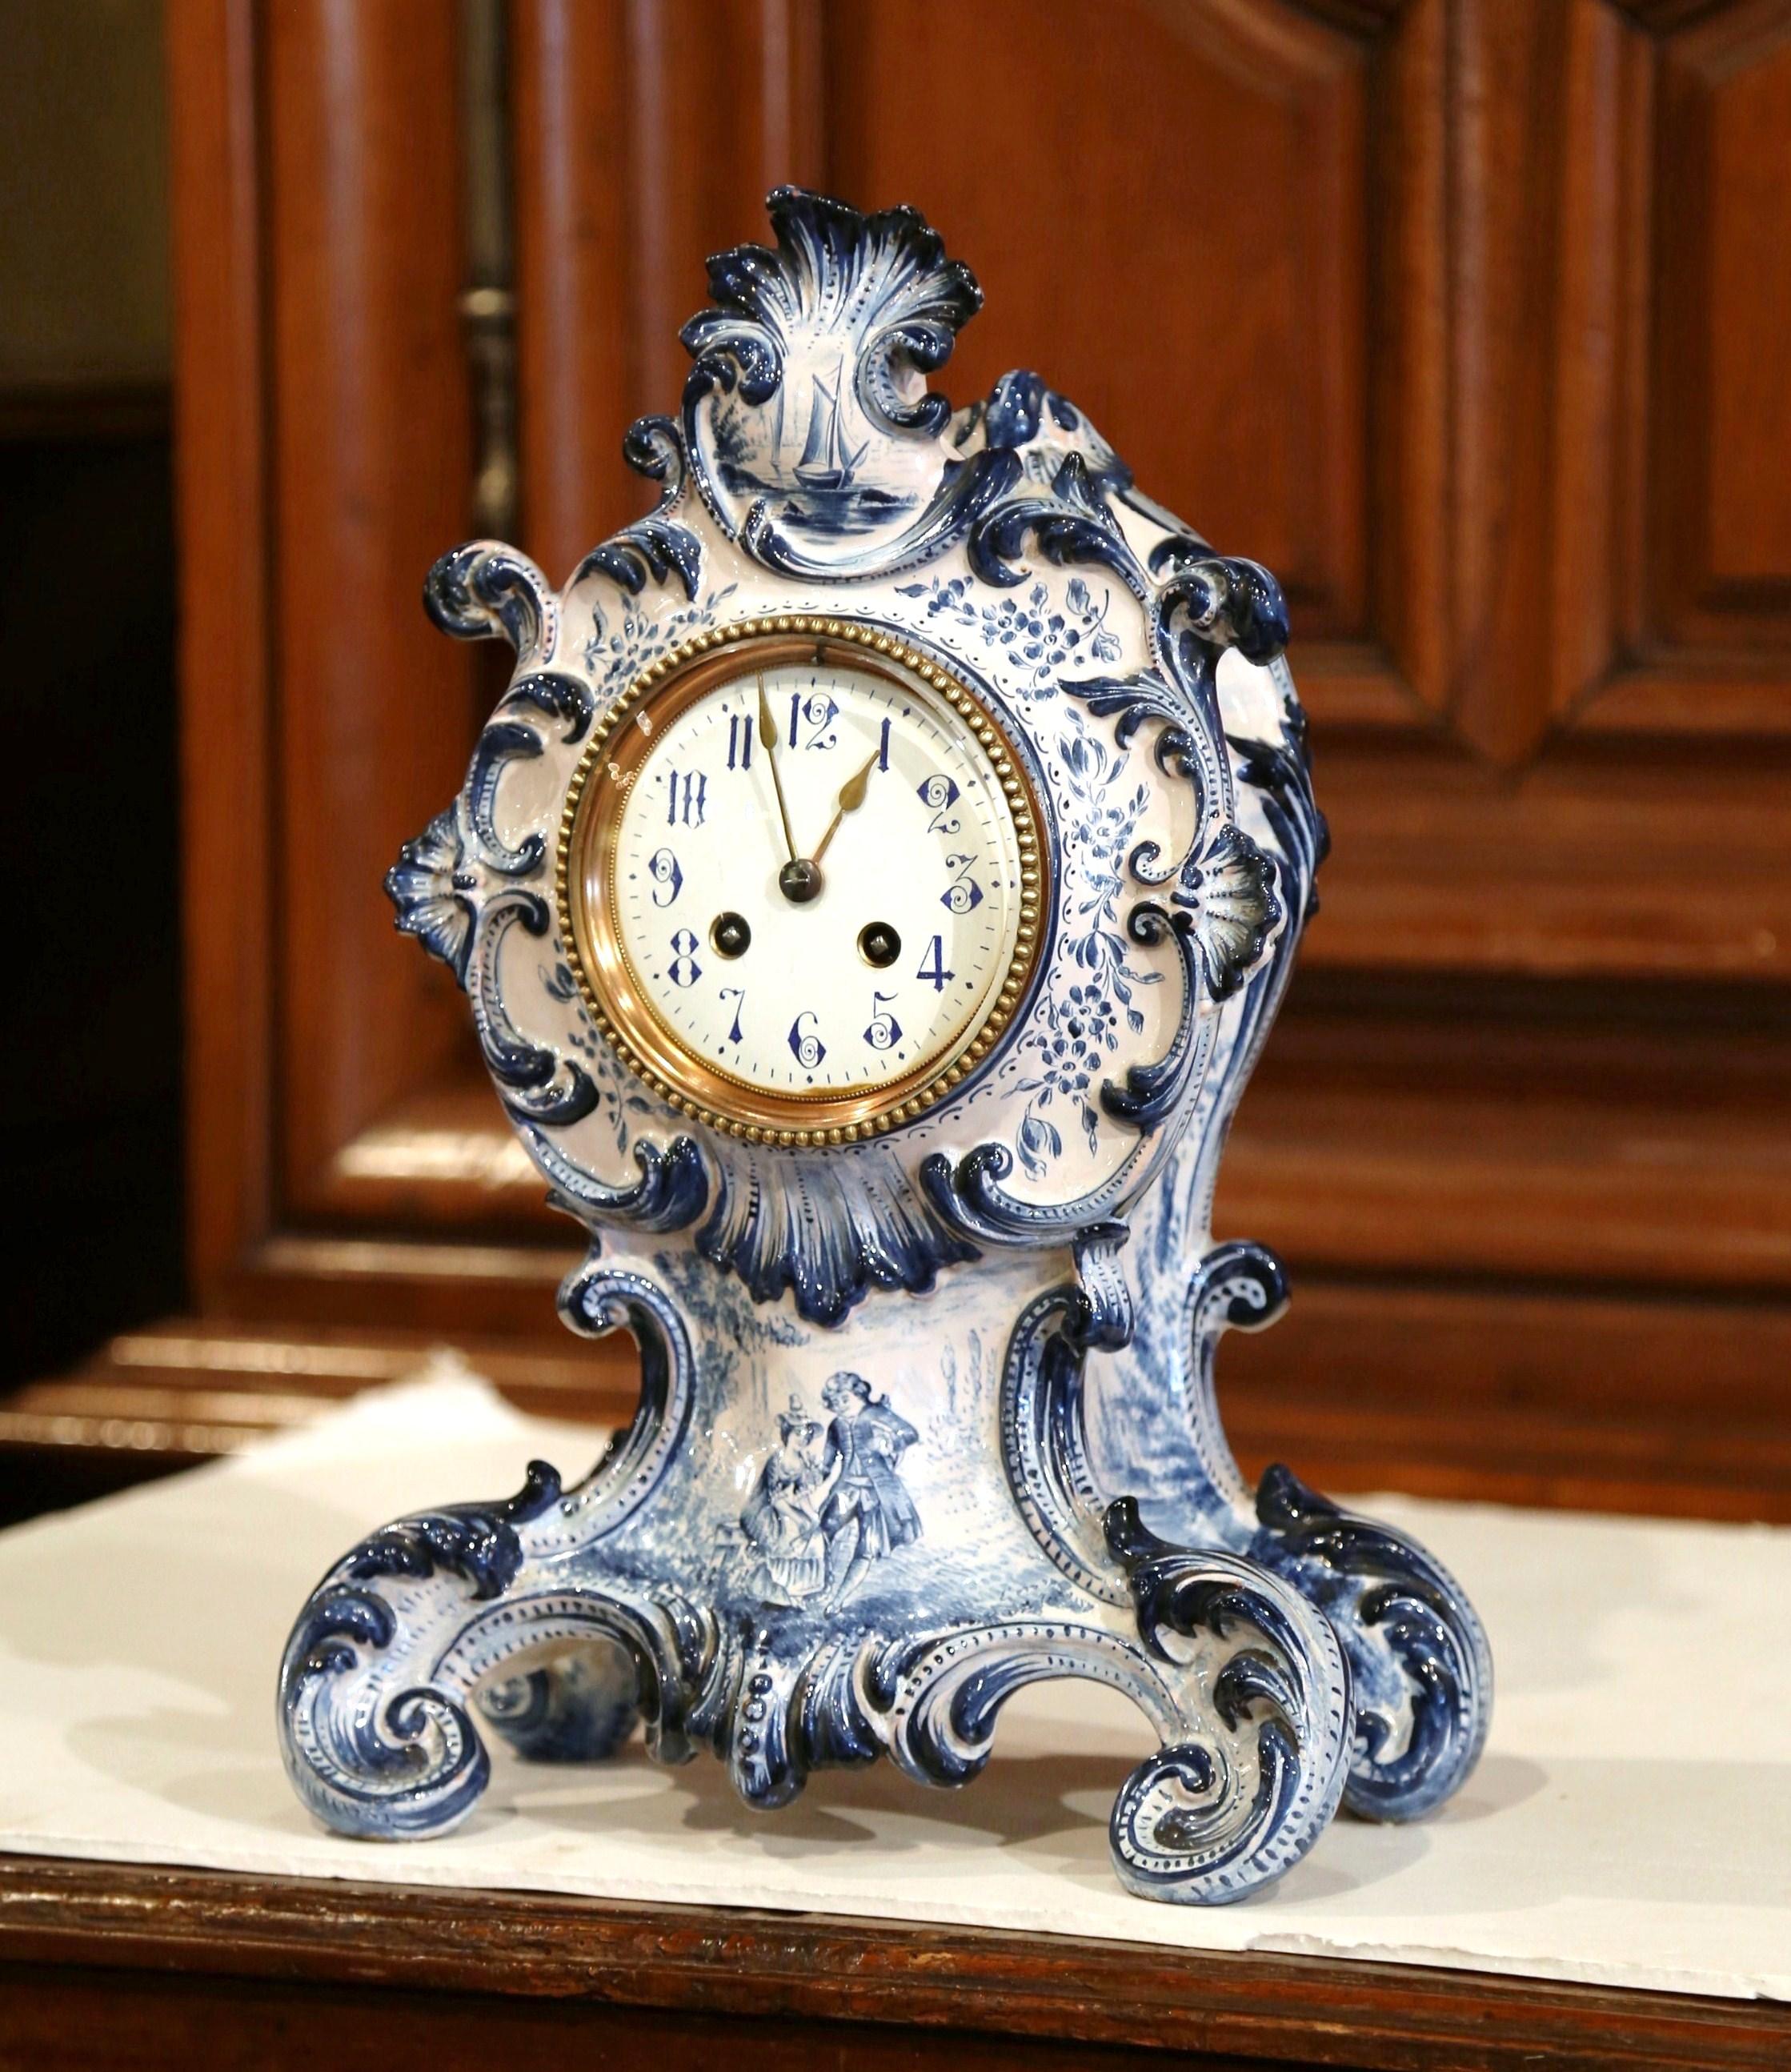 Complete your mantel or desk with this antique, hand-painted Louis XV mantel clock. Created in France, circa 1880, the time keeper has its original clock mechanism, which has been professionally cleaned and checked. Sited on curved feet with